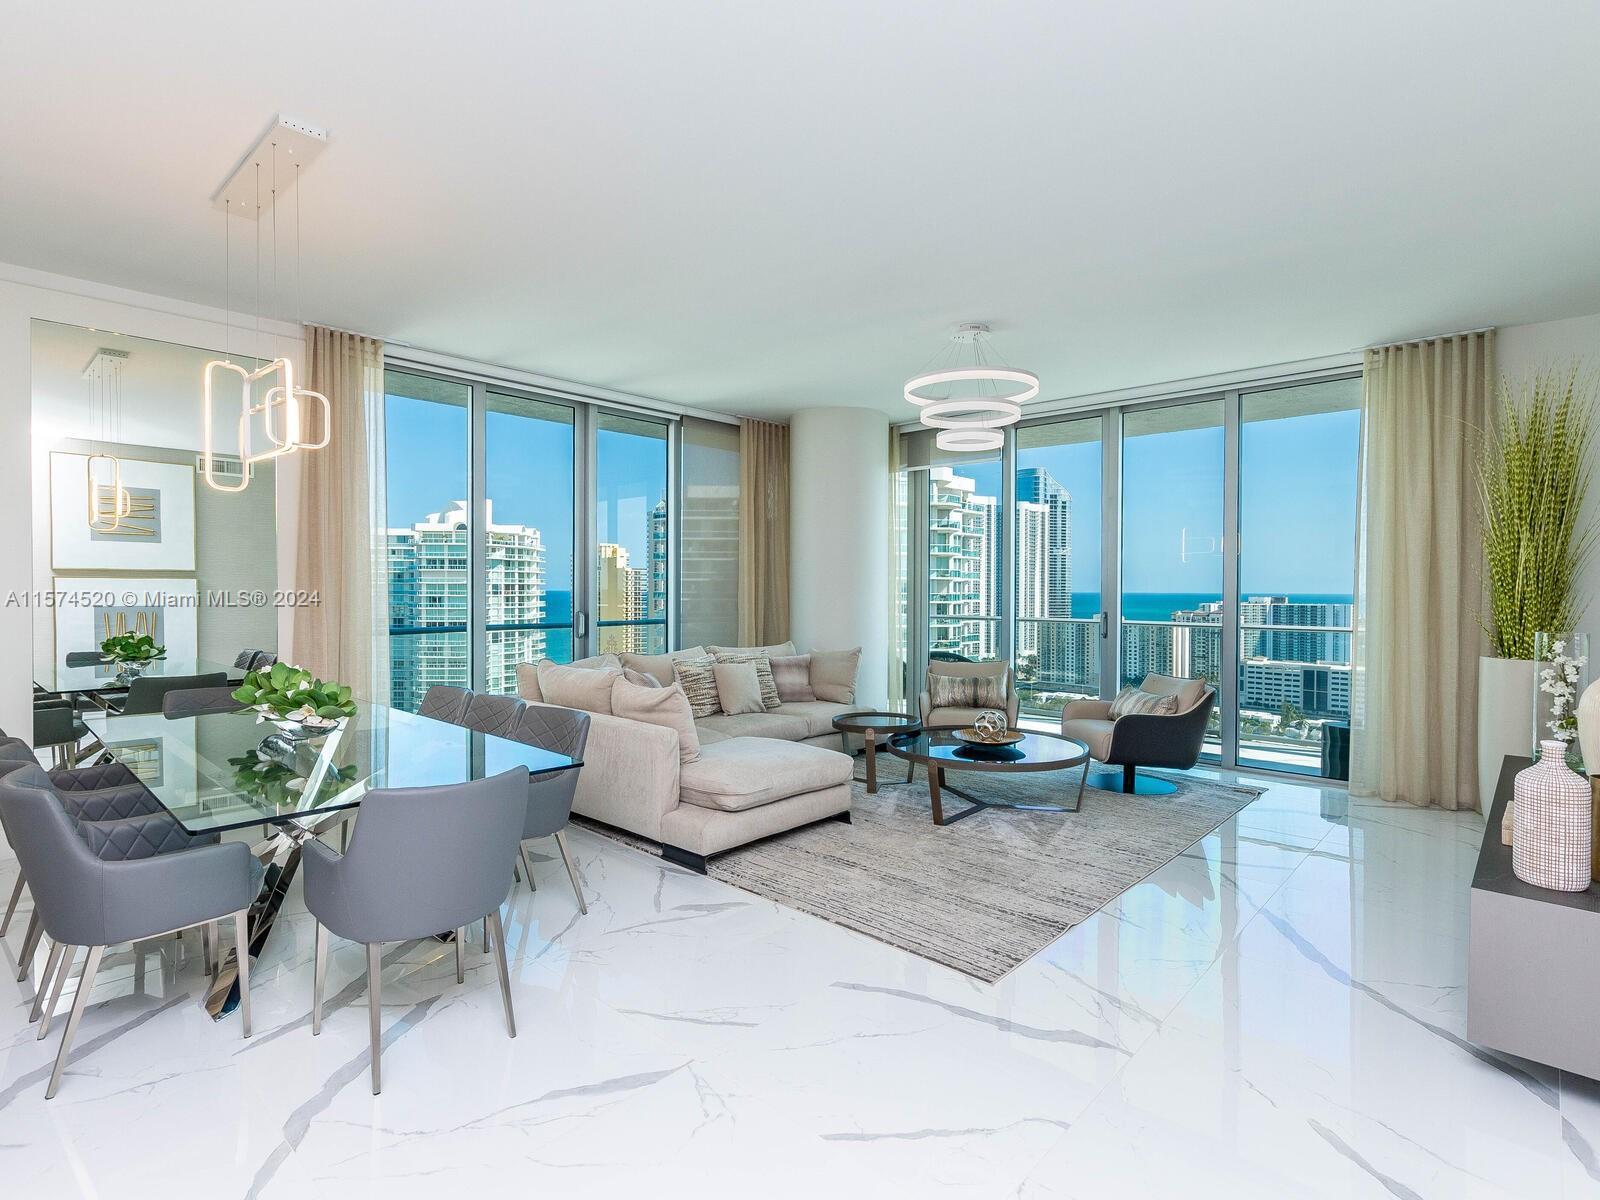 Fantastic furnished unit in Sunny Isles, close to the beach, with 5 stars amenities. Tastefully upgr